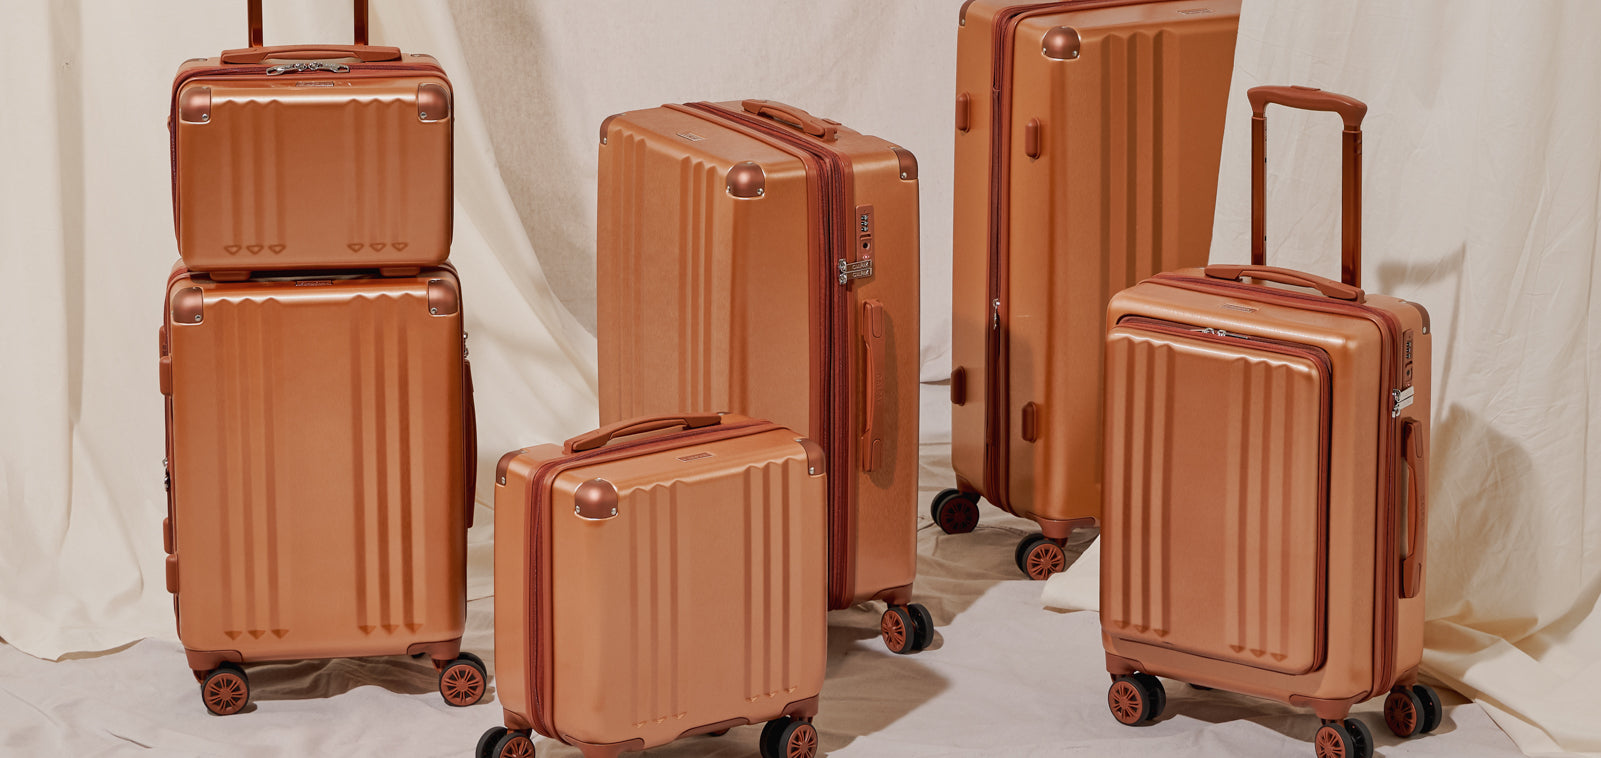 CALPAK Ambeur Mini Carry-On Luggage in Copper | 16